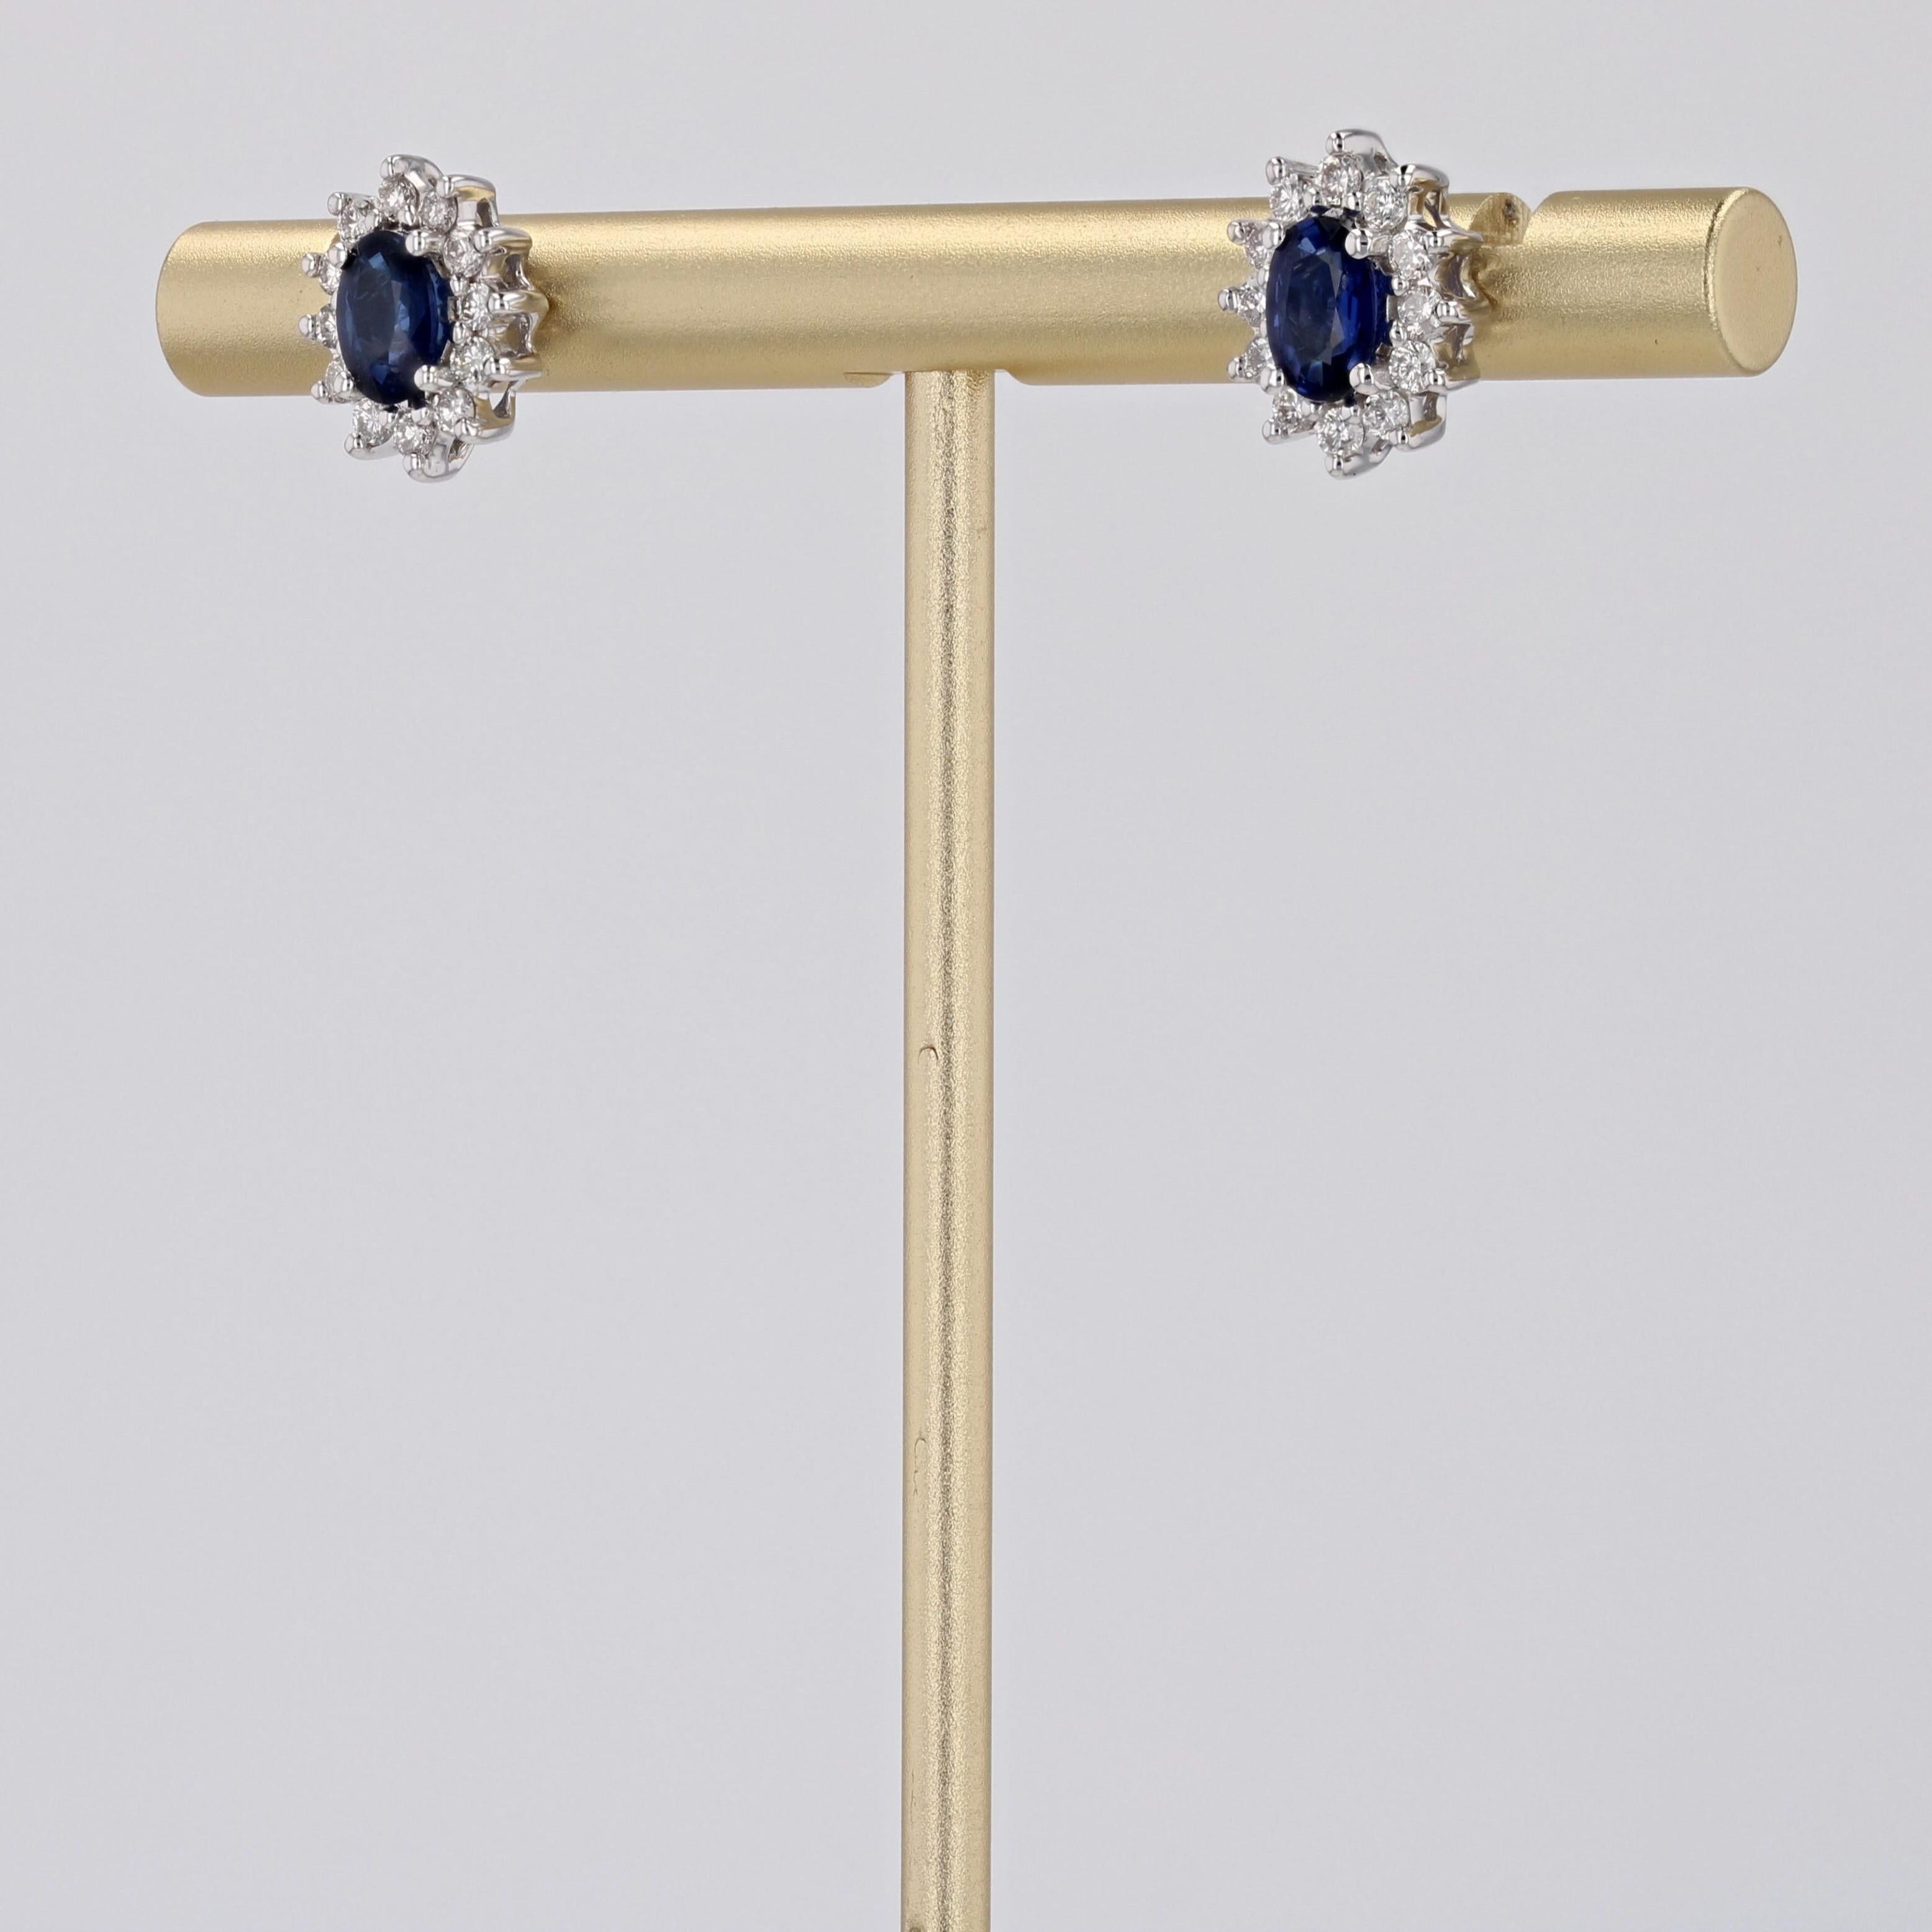 For pierced ears.
Earrings in 18 karat white gold.
These daisy earrings feature a central oval blue sapphire set in modern brilliant-cut diamonds. The clasp of these sapphire-diamond earrings is a butterfly.r, surrounded by brilliant- cut diamonds.